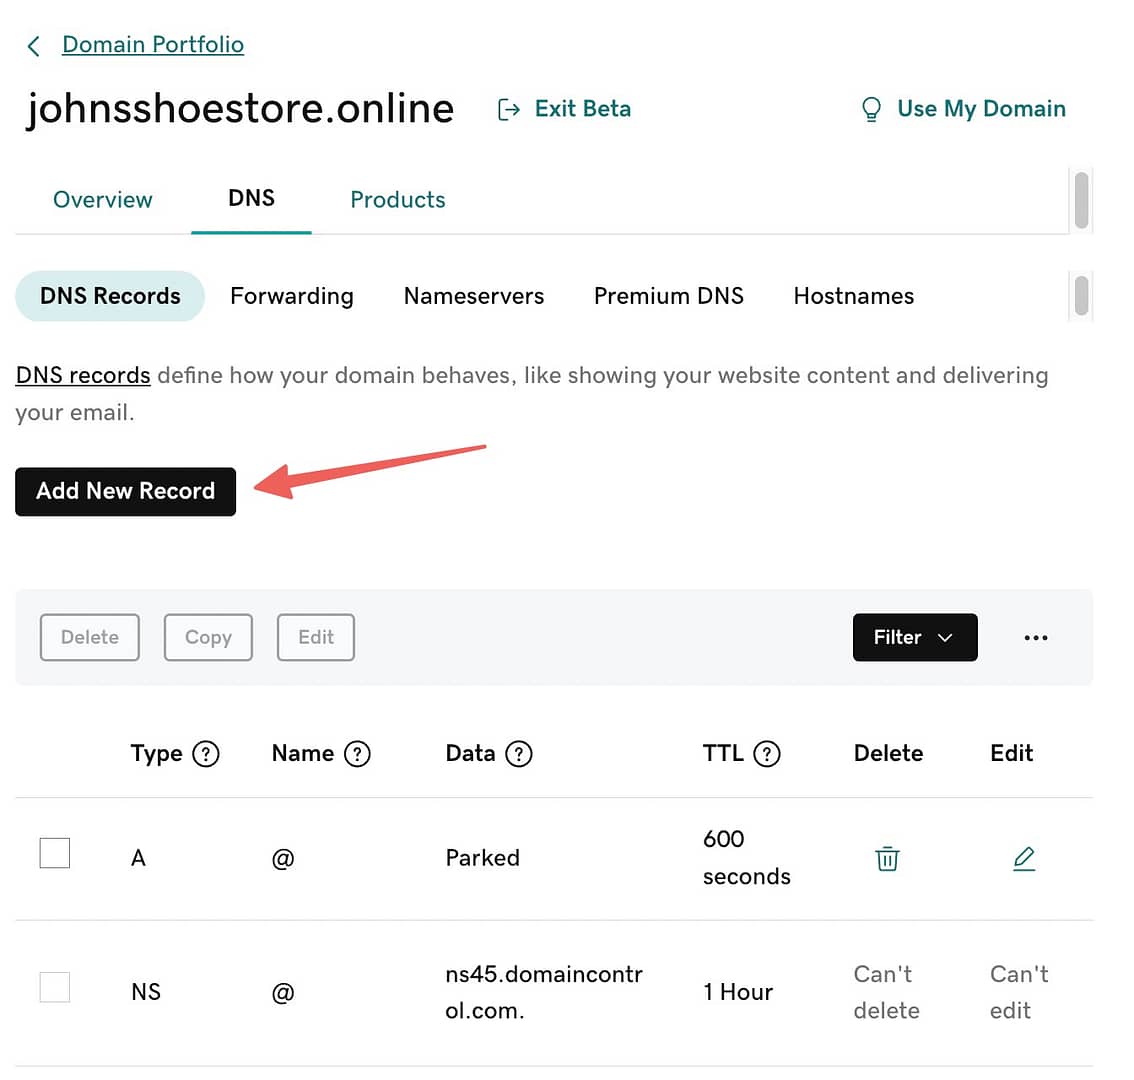 How to create subdomain in GoDaddy: Johnshoestore.online DNS Records with a red arrow pointing to "Add New Record" button.